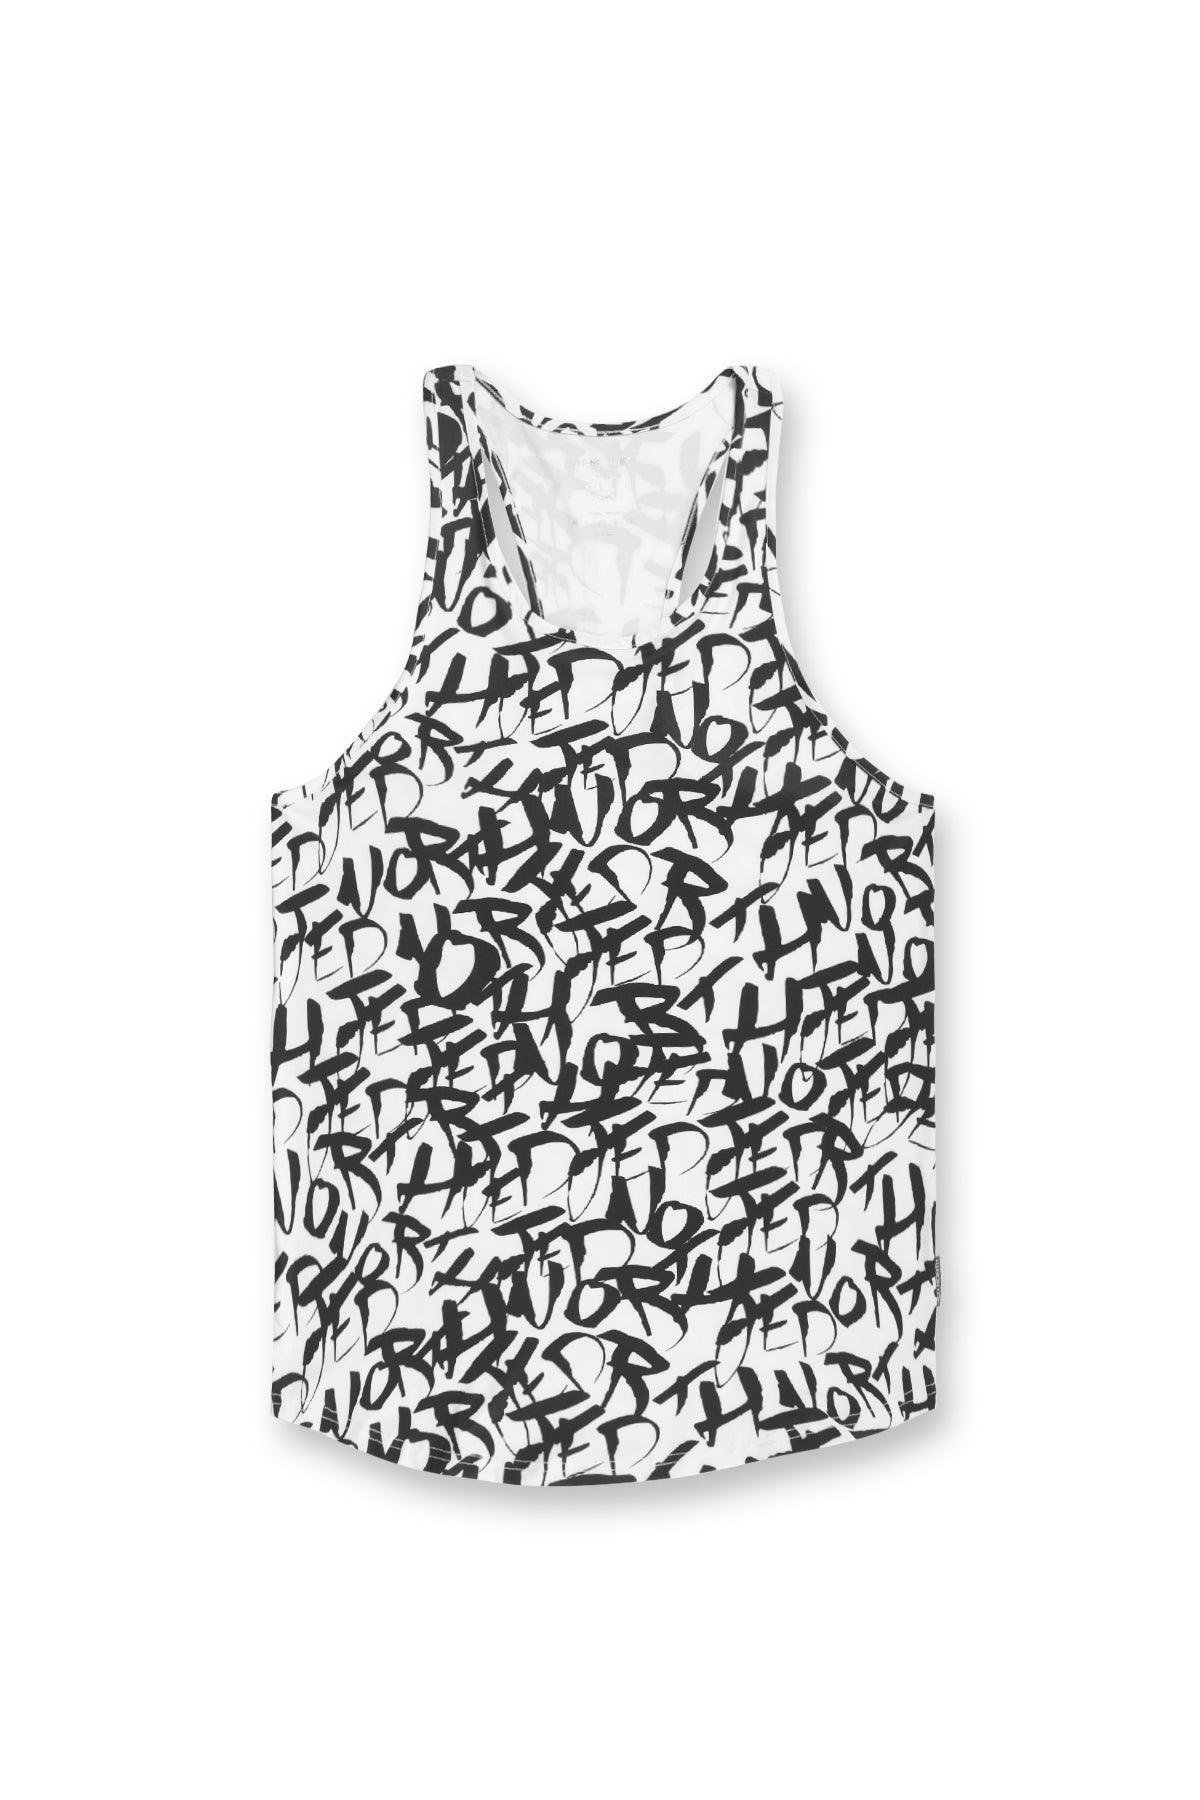 Graphic Muscle Stringer - Chaotic White - Jed North